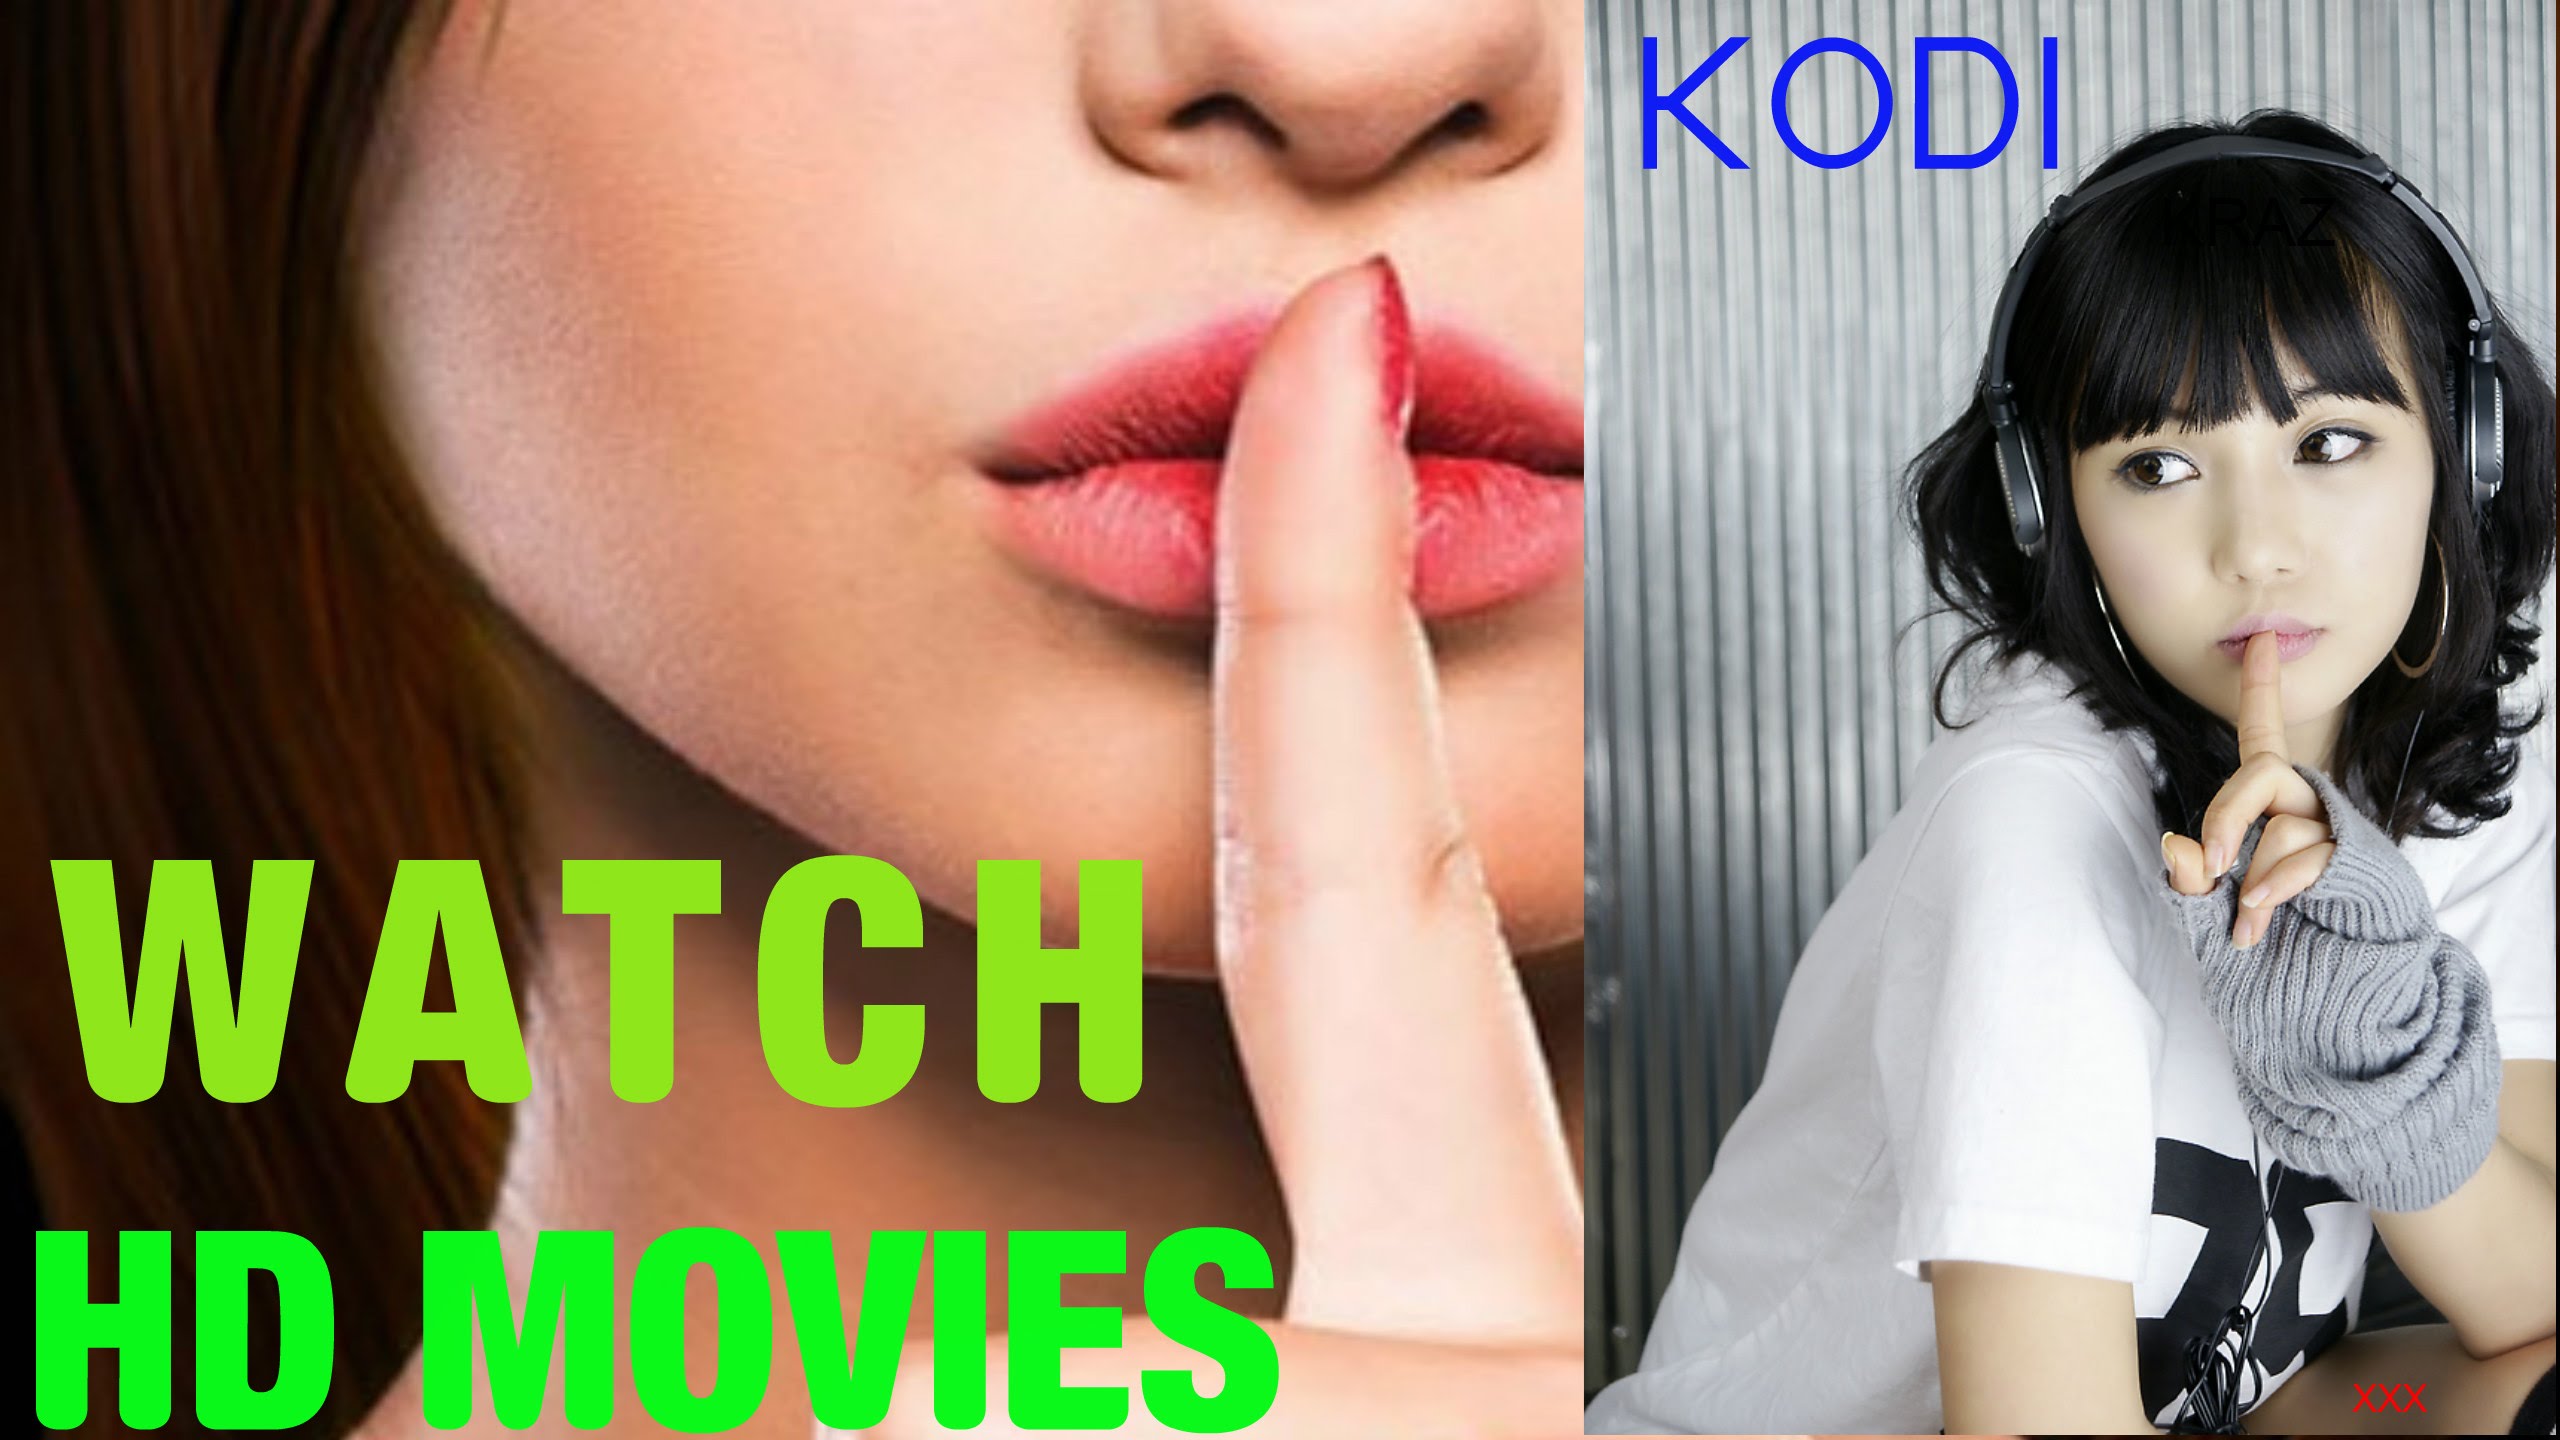 kmt addon for kodi movies optional adult content